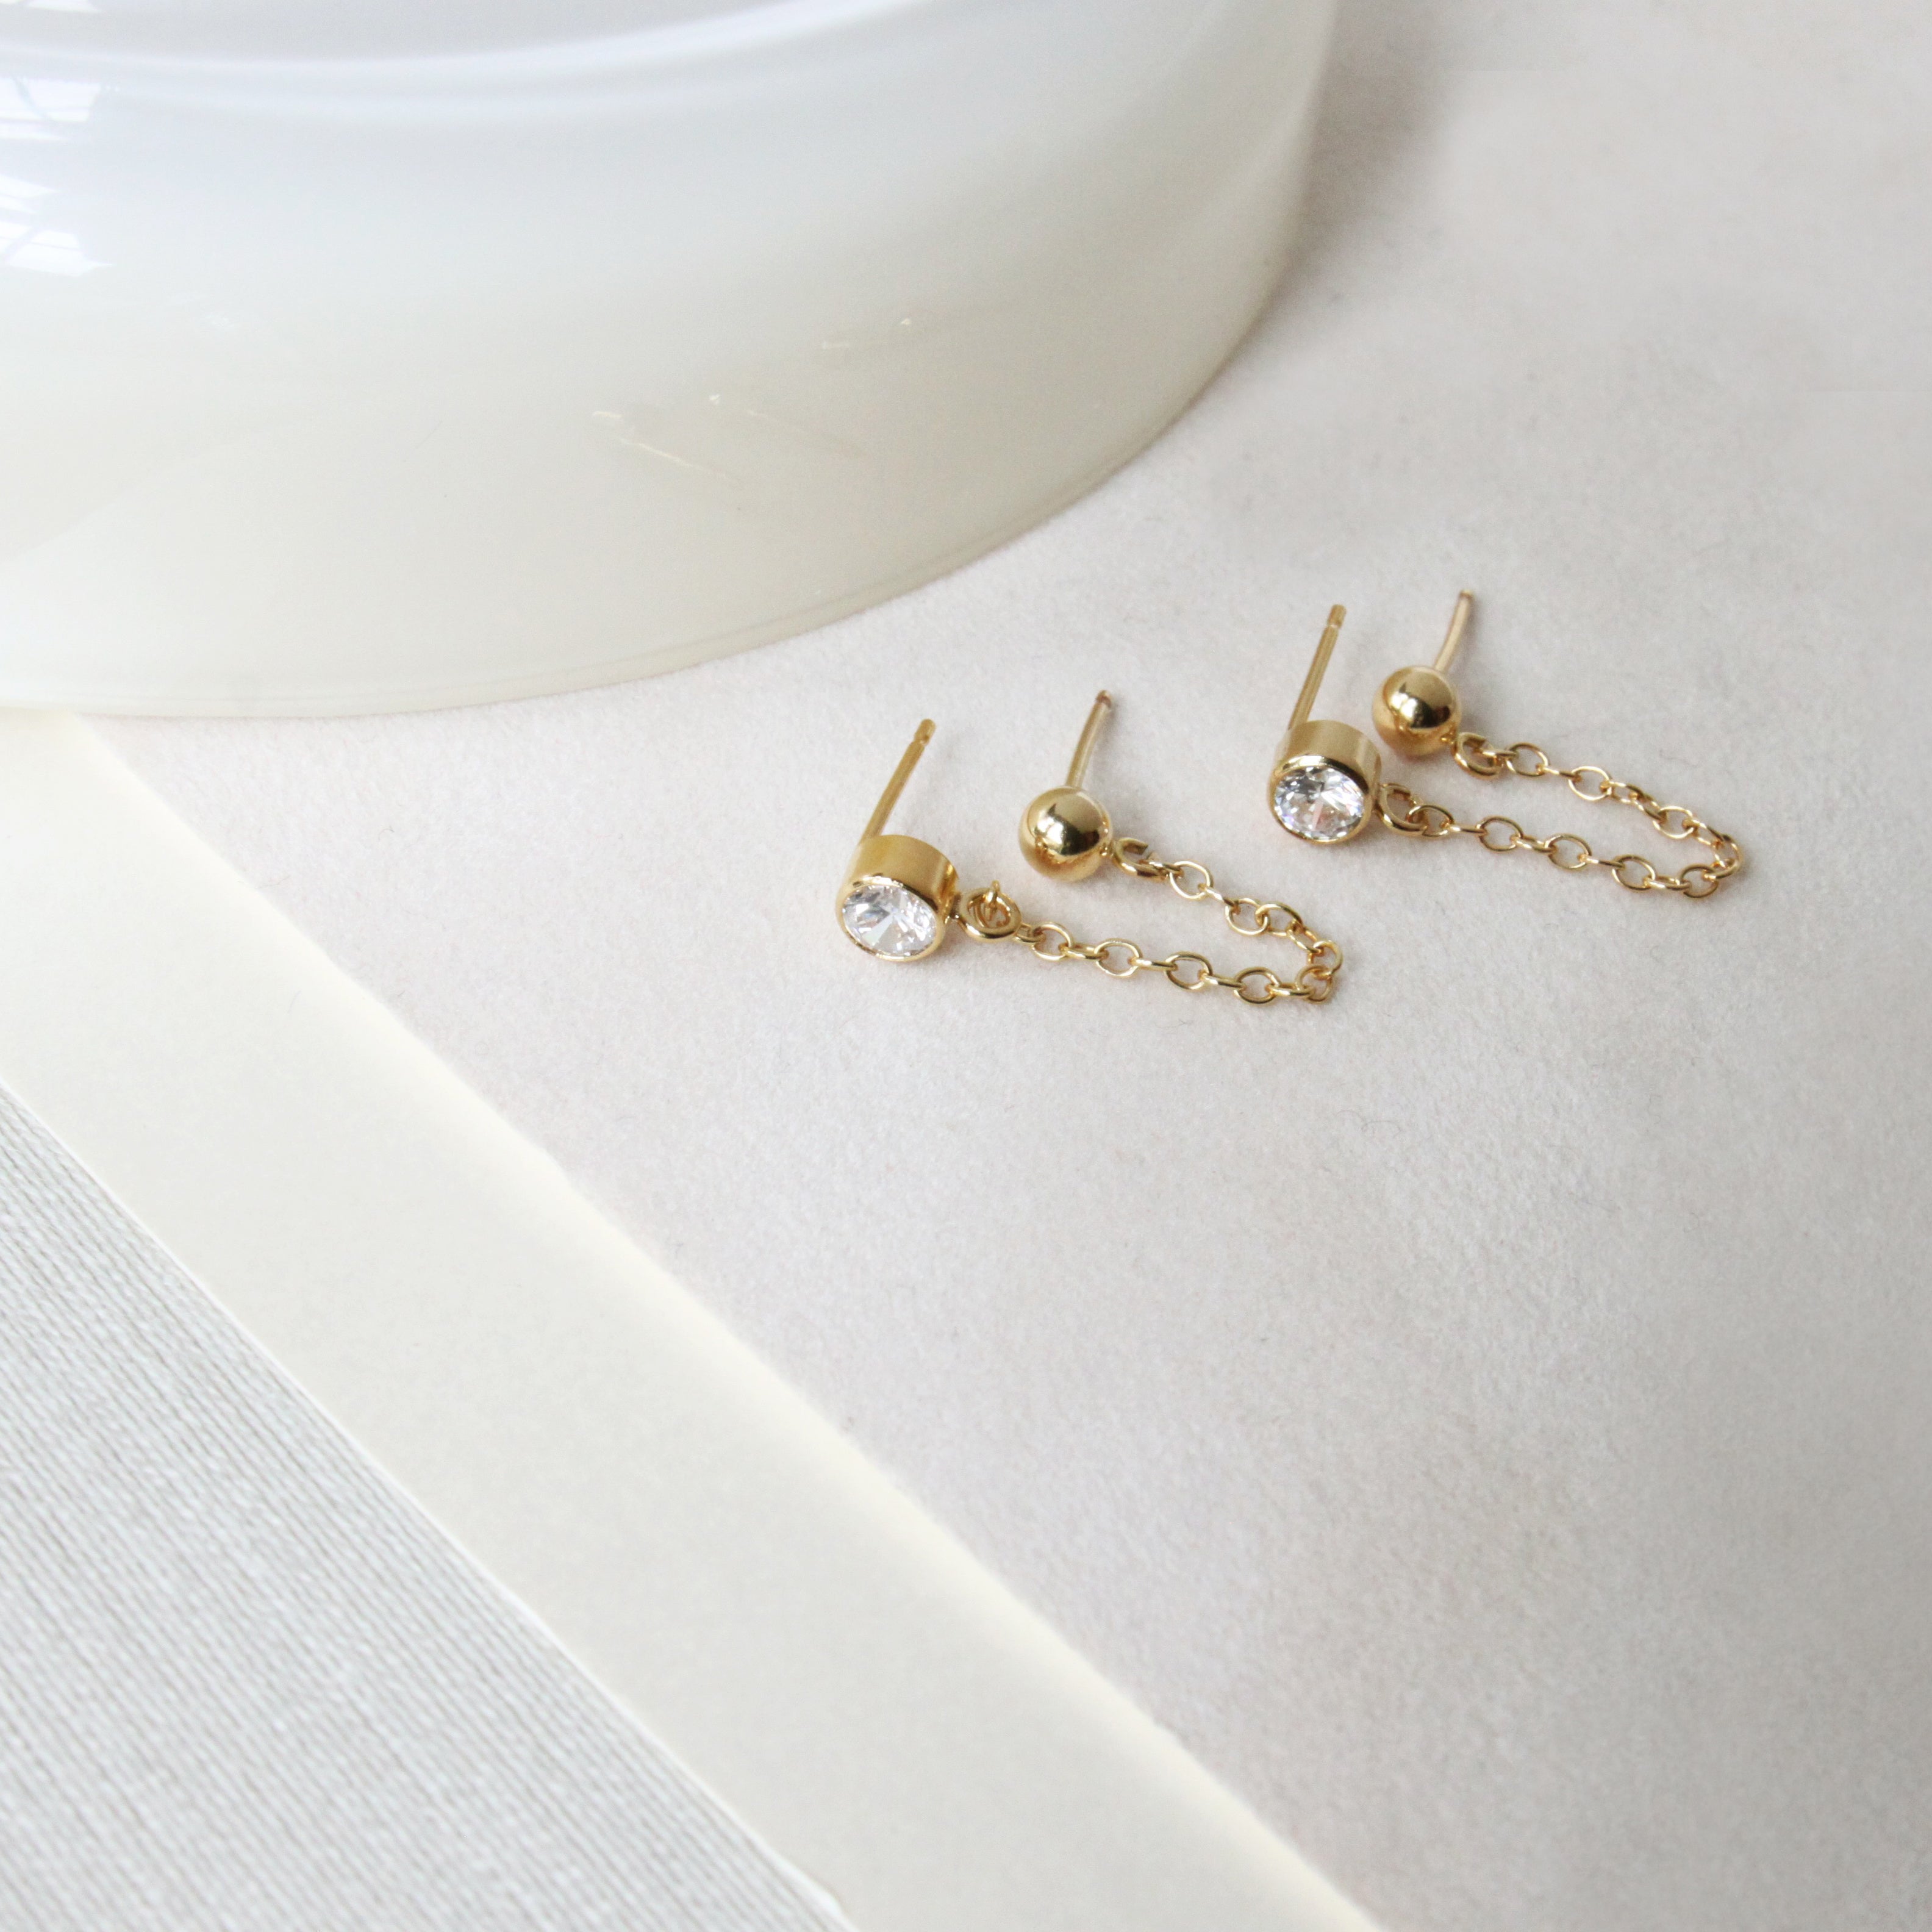 Gold earrings with a genuine white topaz stone